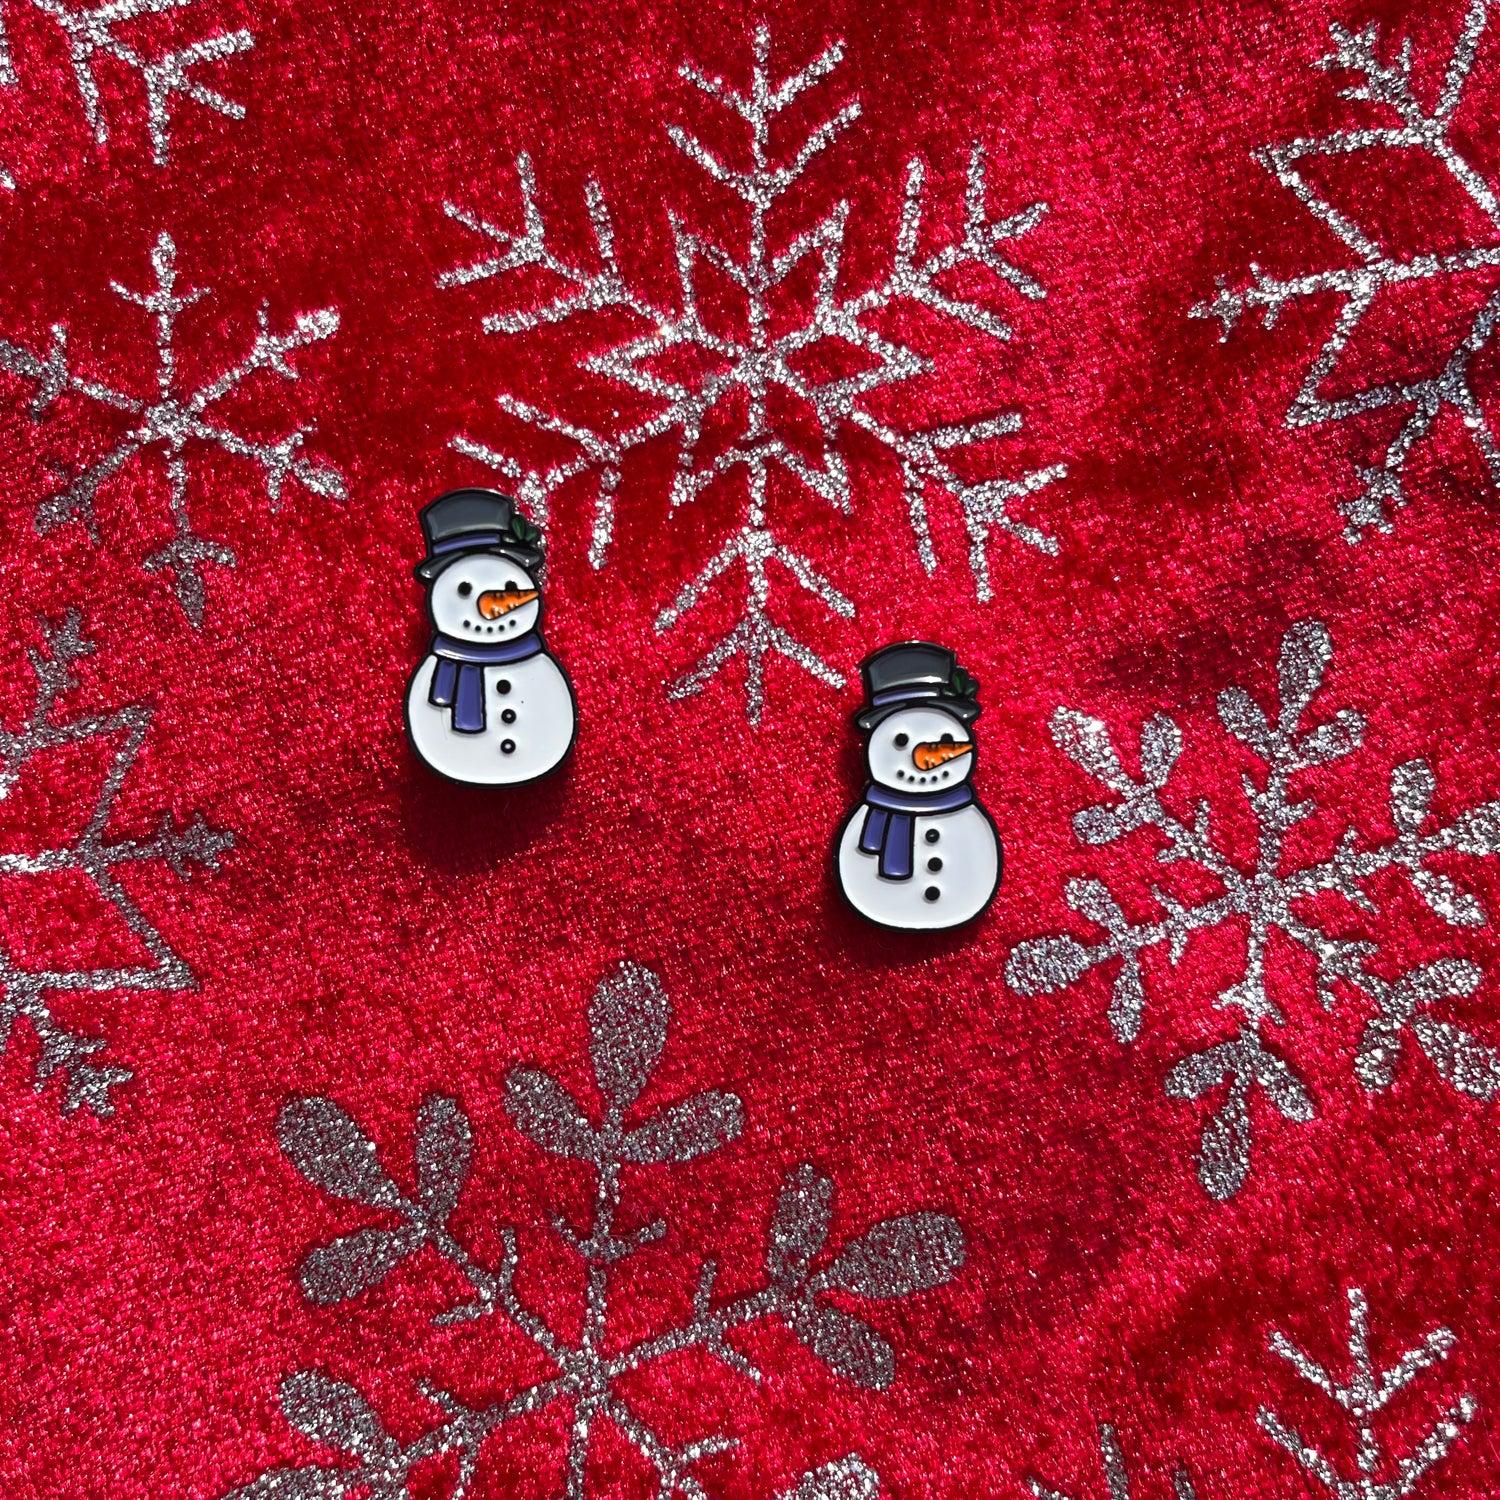 pisnickety snowman horse show number pins on a red background with a snowflake pattern